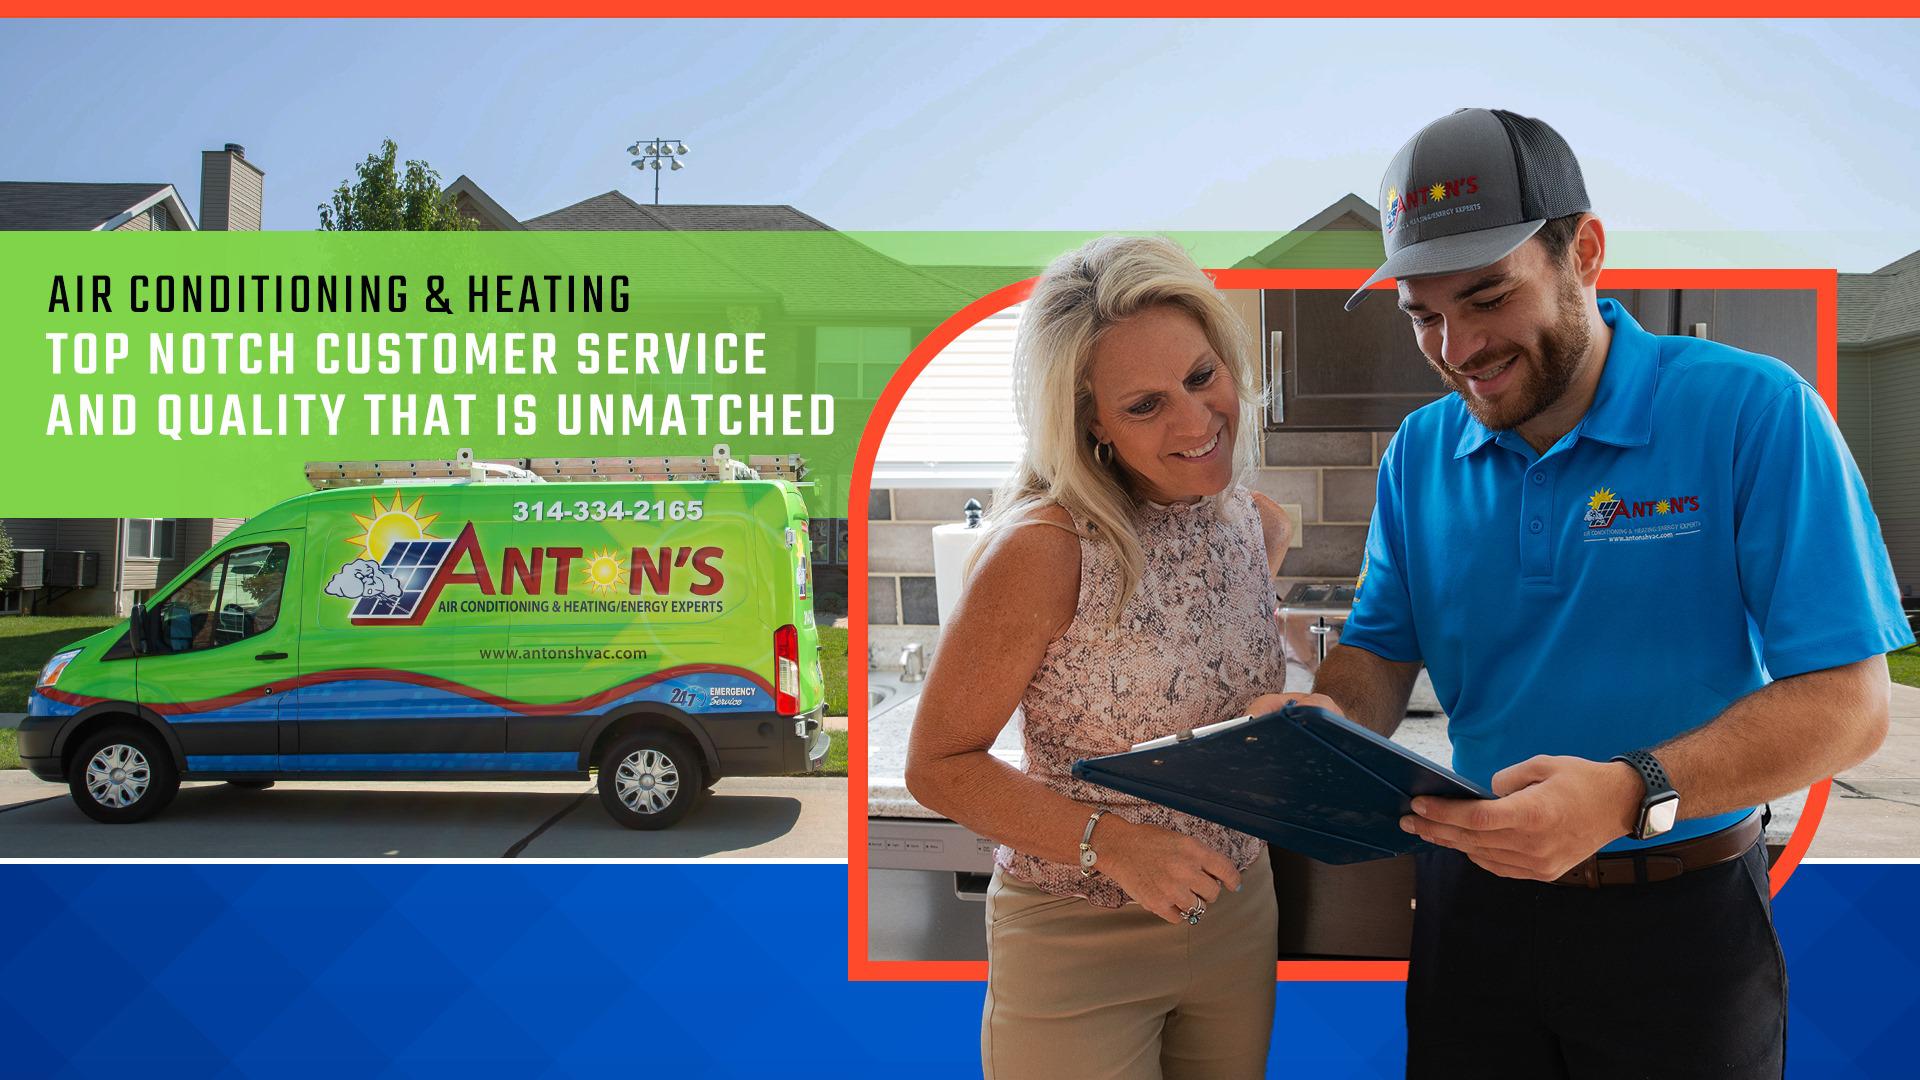 Anton's Plumbing, Heating/Cooling and Energy Experts